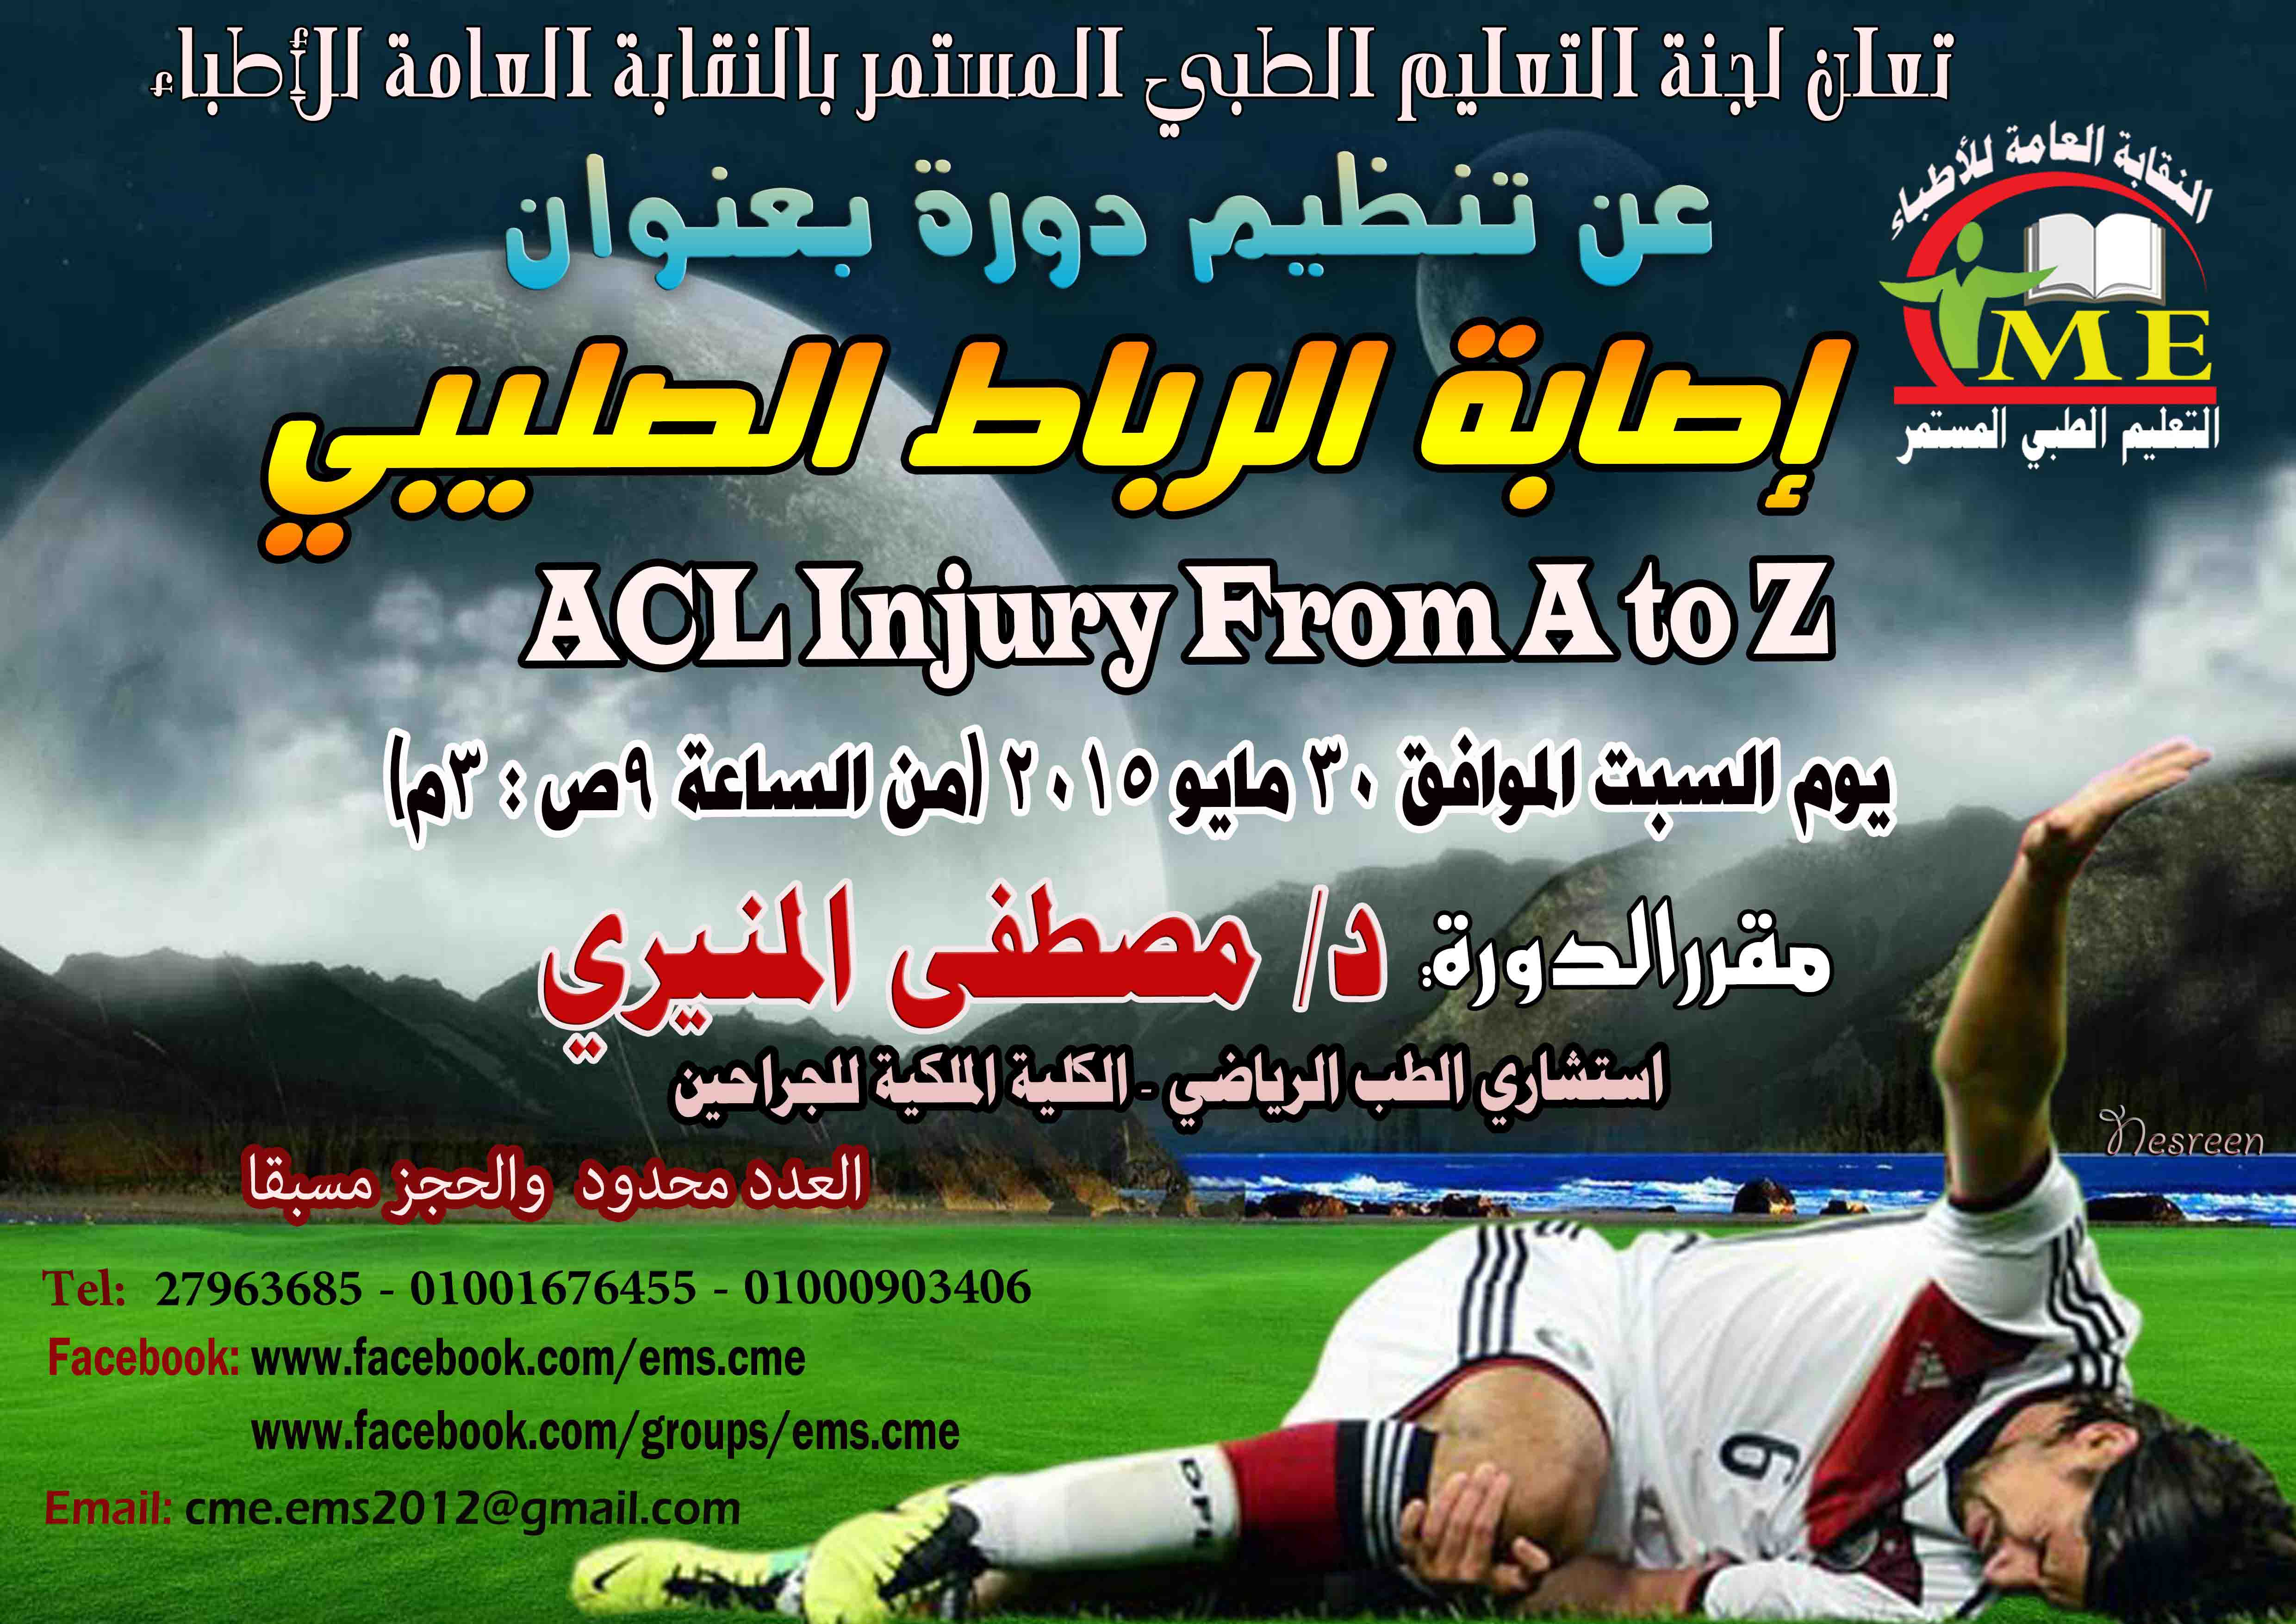 ACL Injury From A to Z